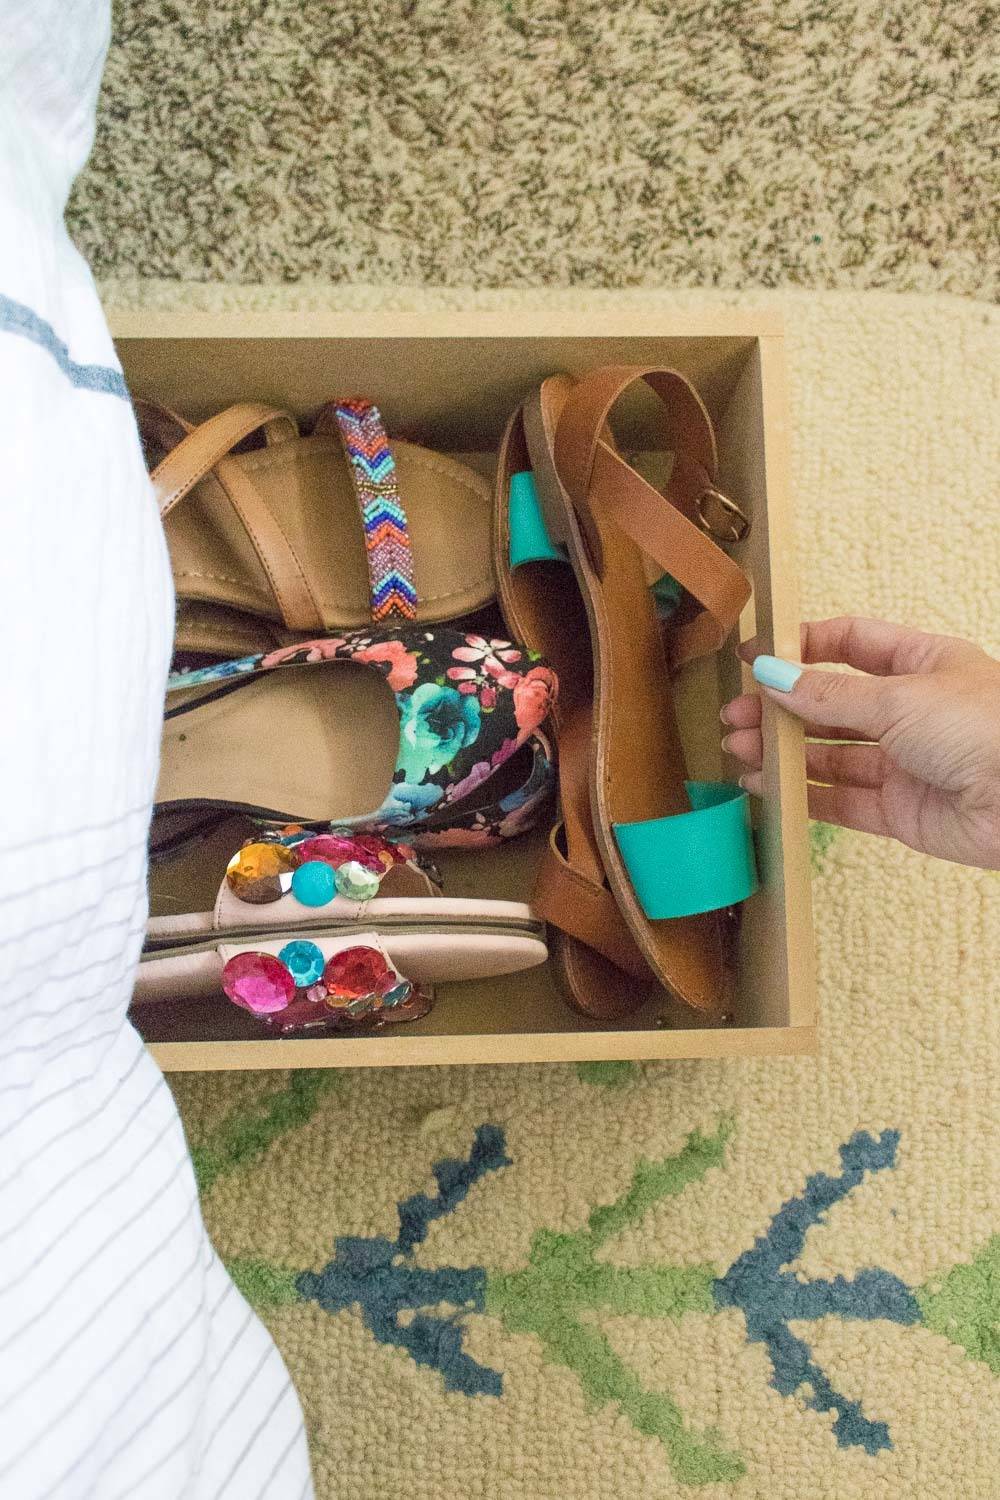 A drawer contains several pairs of colorful sandals.